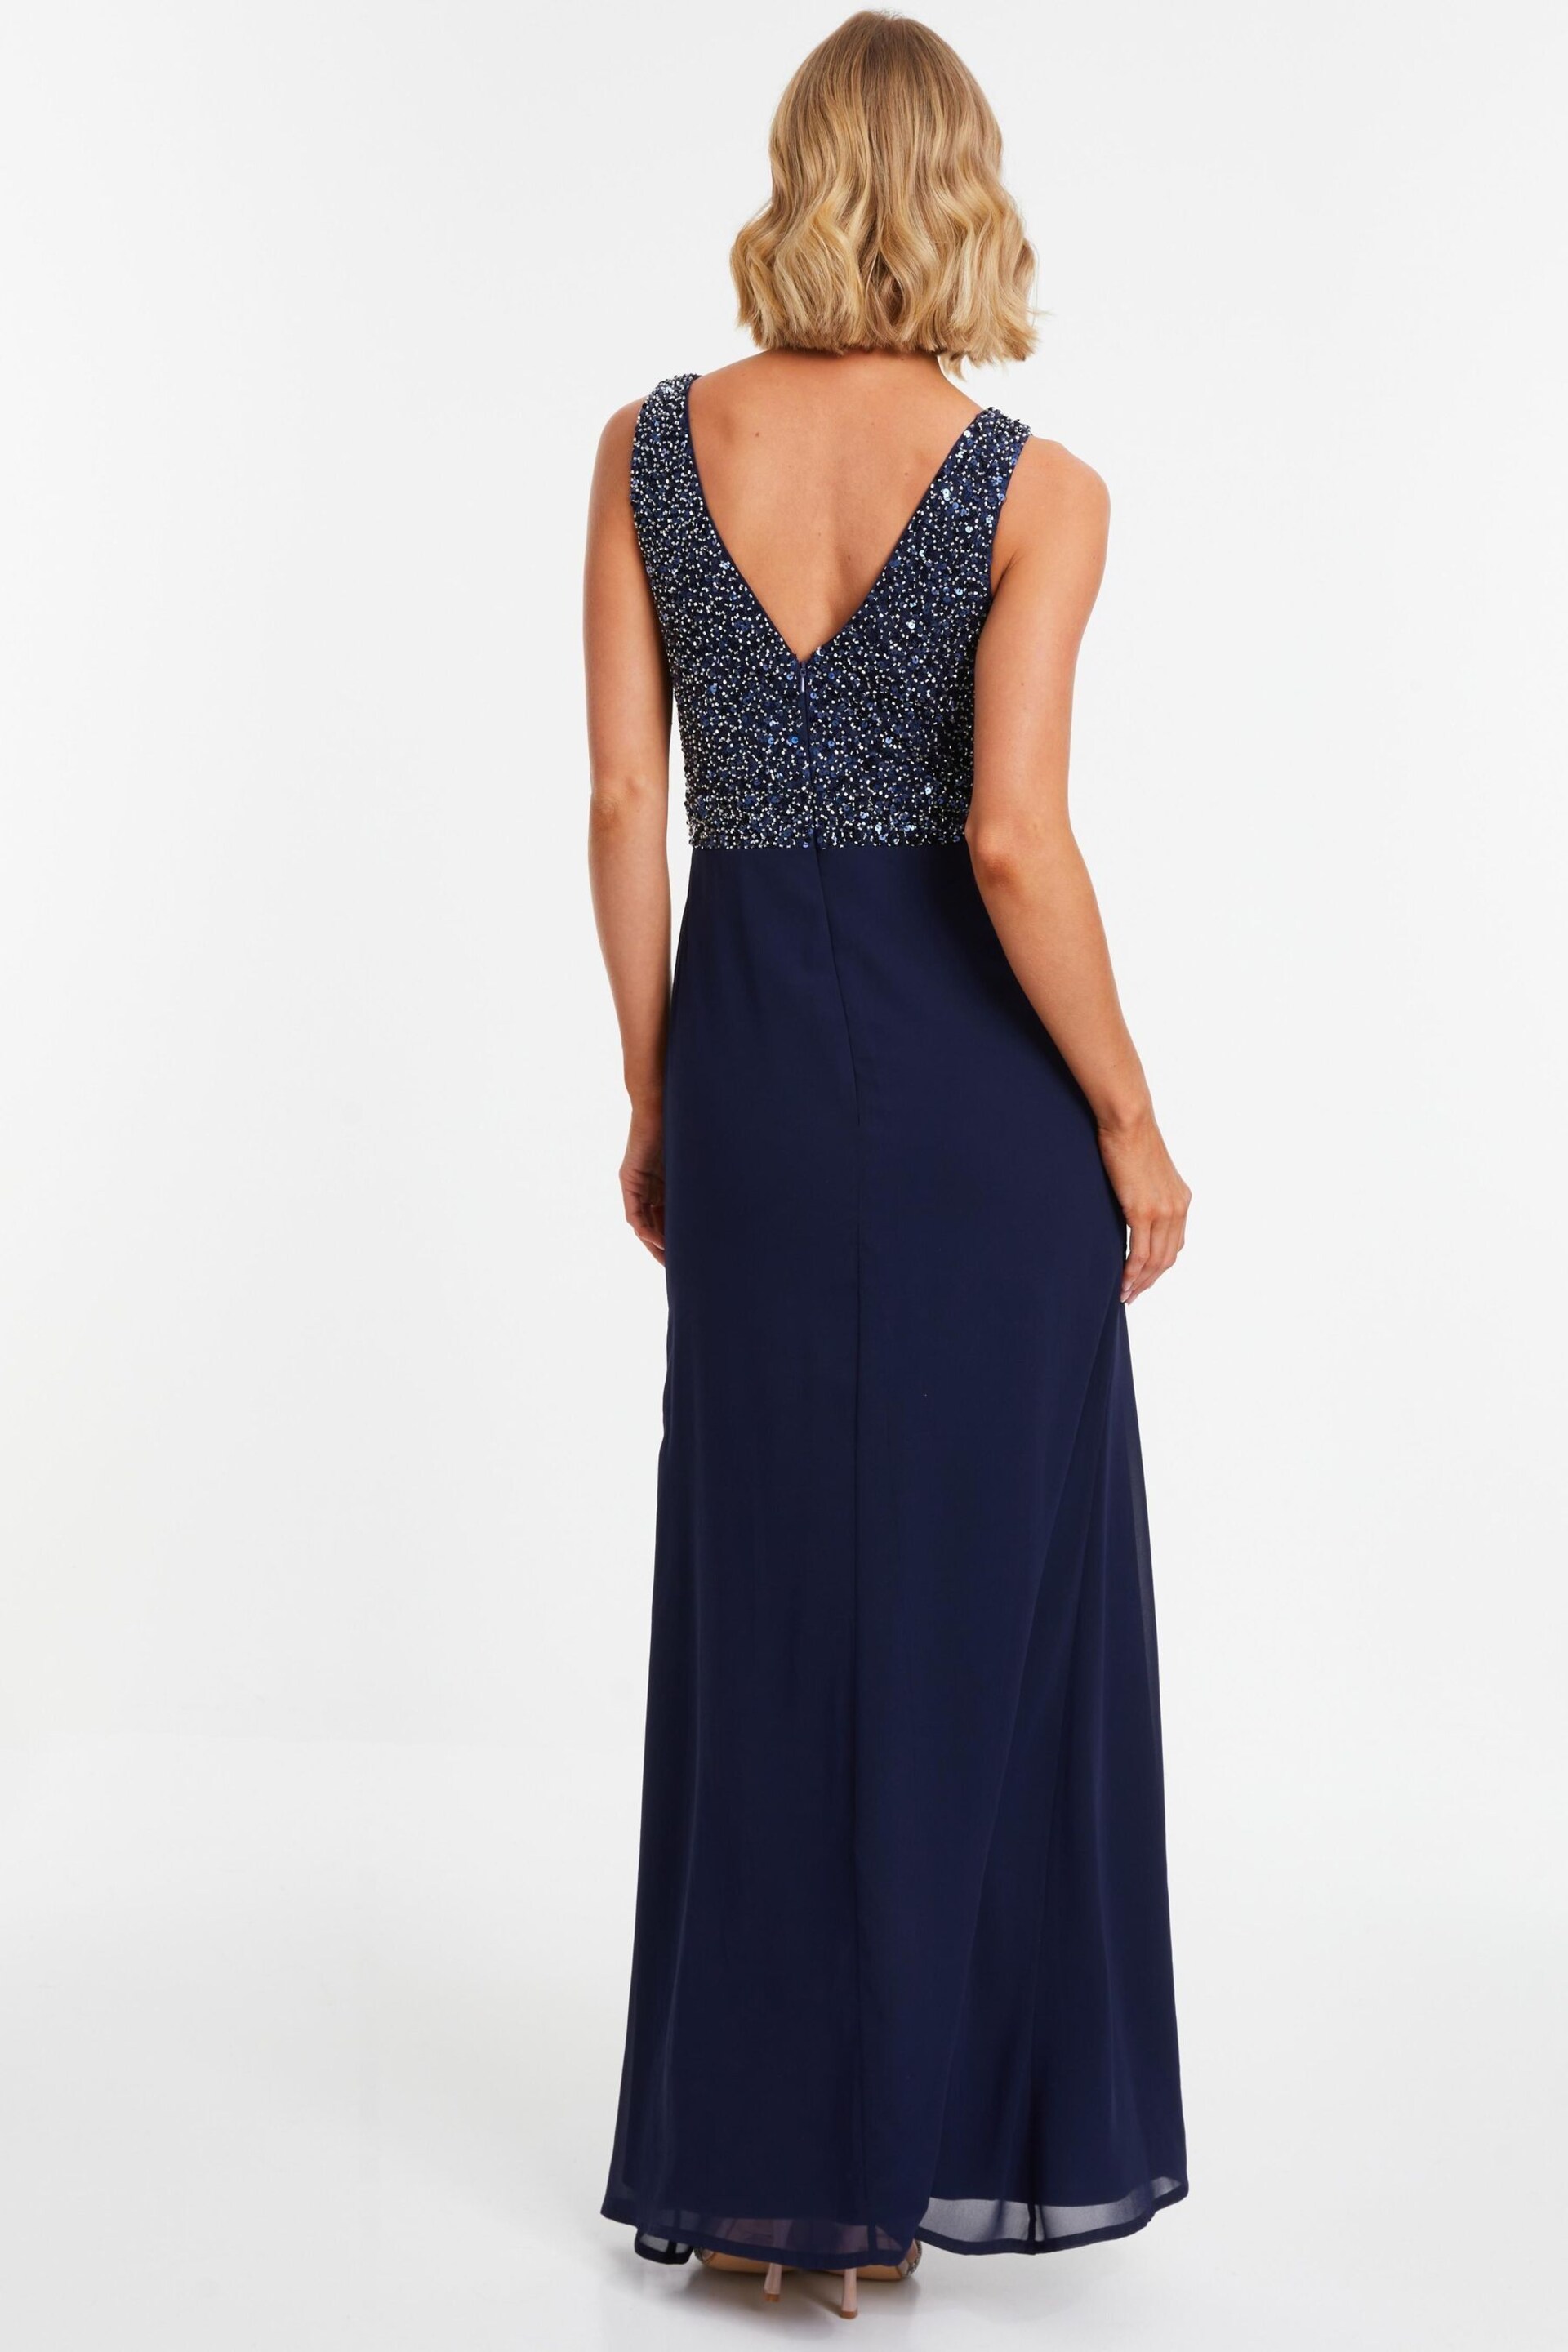 Quiz Blue Chiffon Maxi Dress with Sequin Bodice and Slit - Image 4 of 7